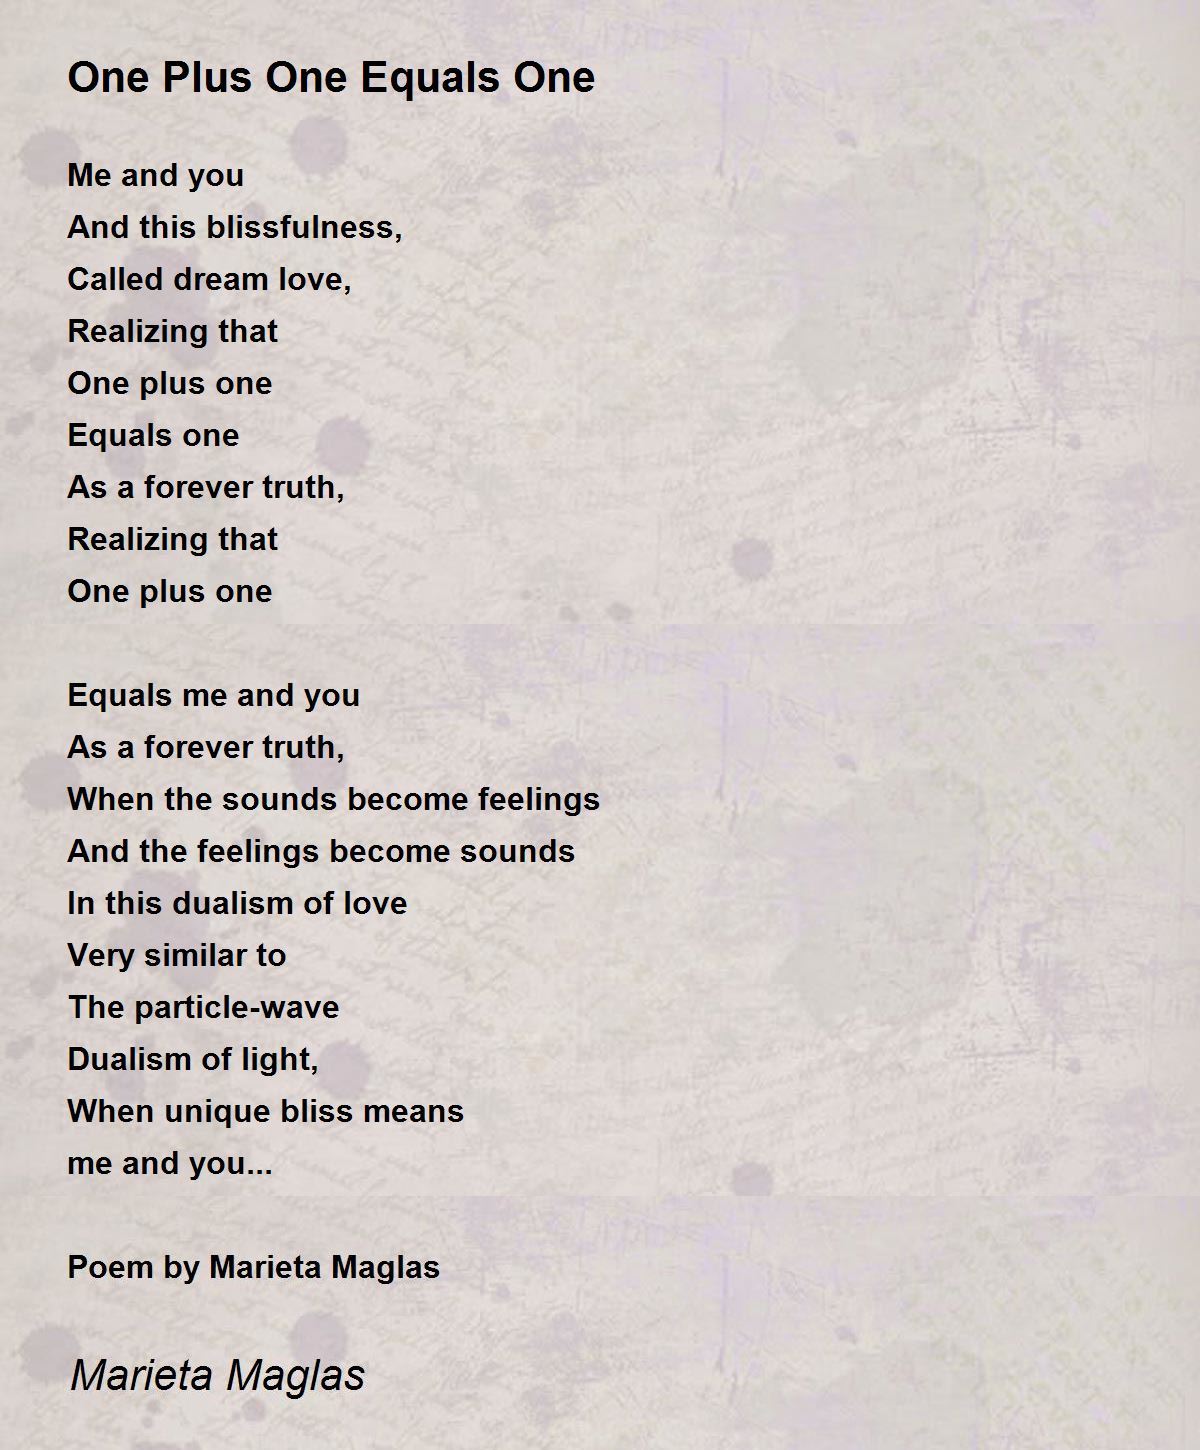 One One Equals One - Plus One Equals One by Marieta Maglas